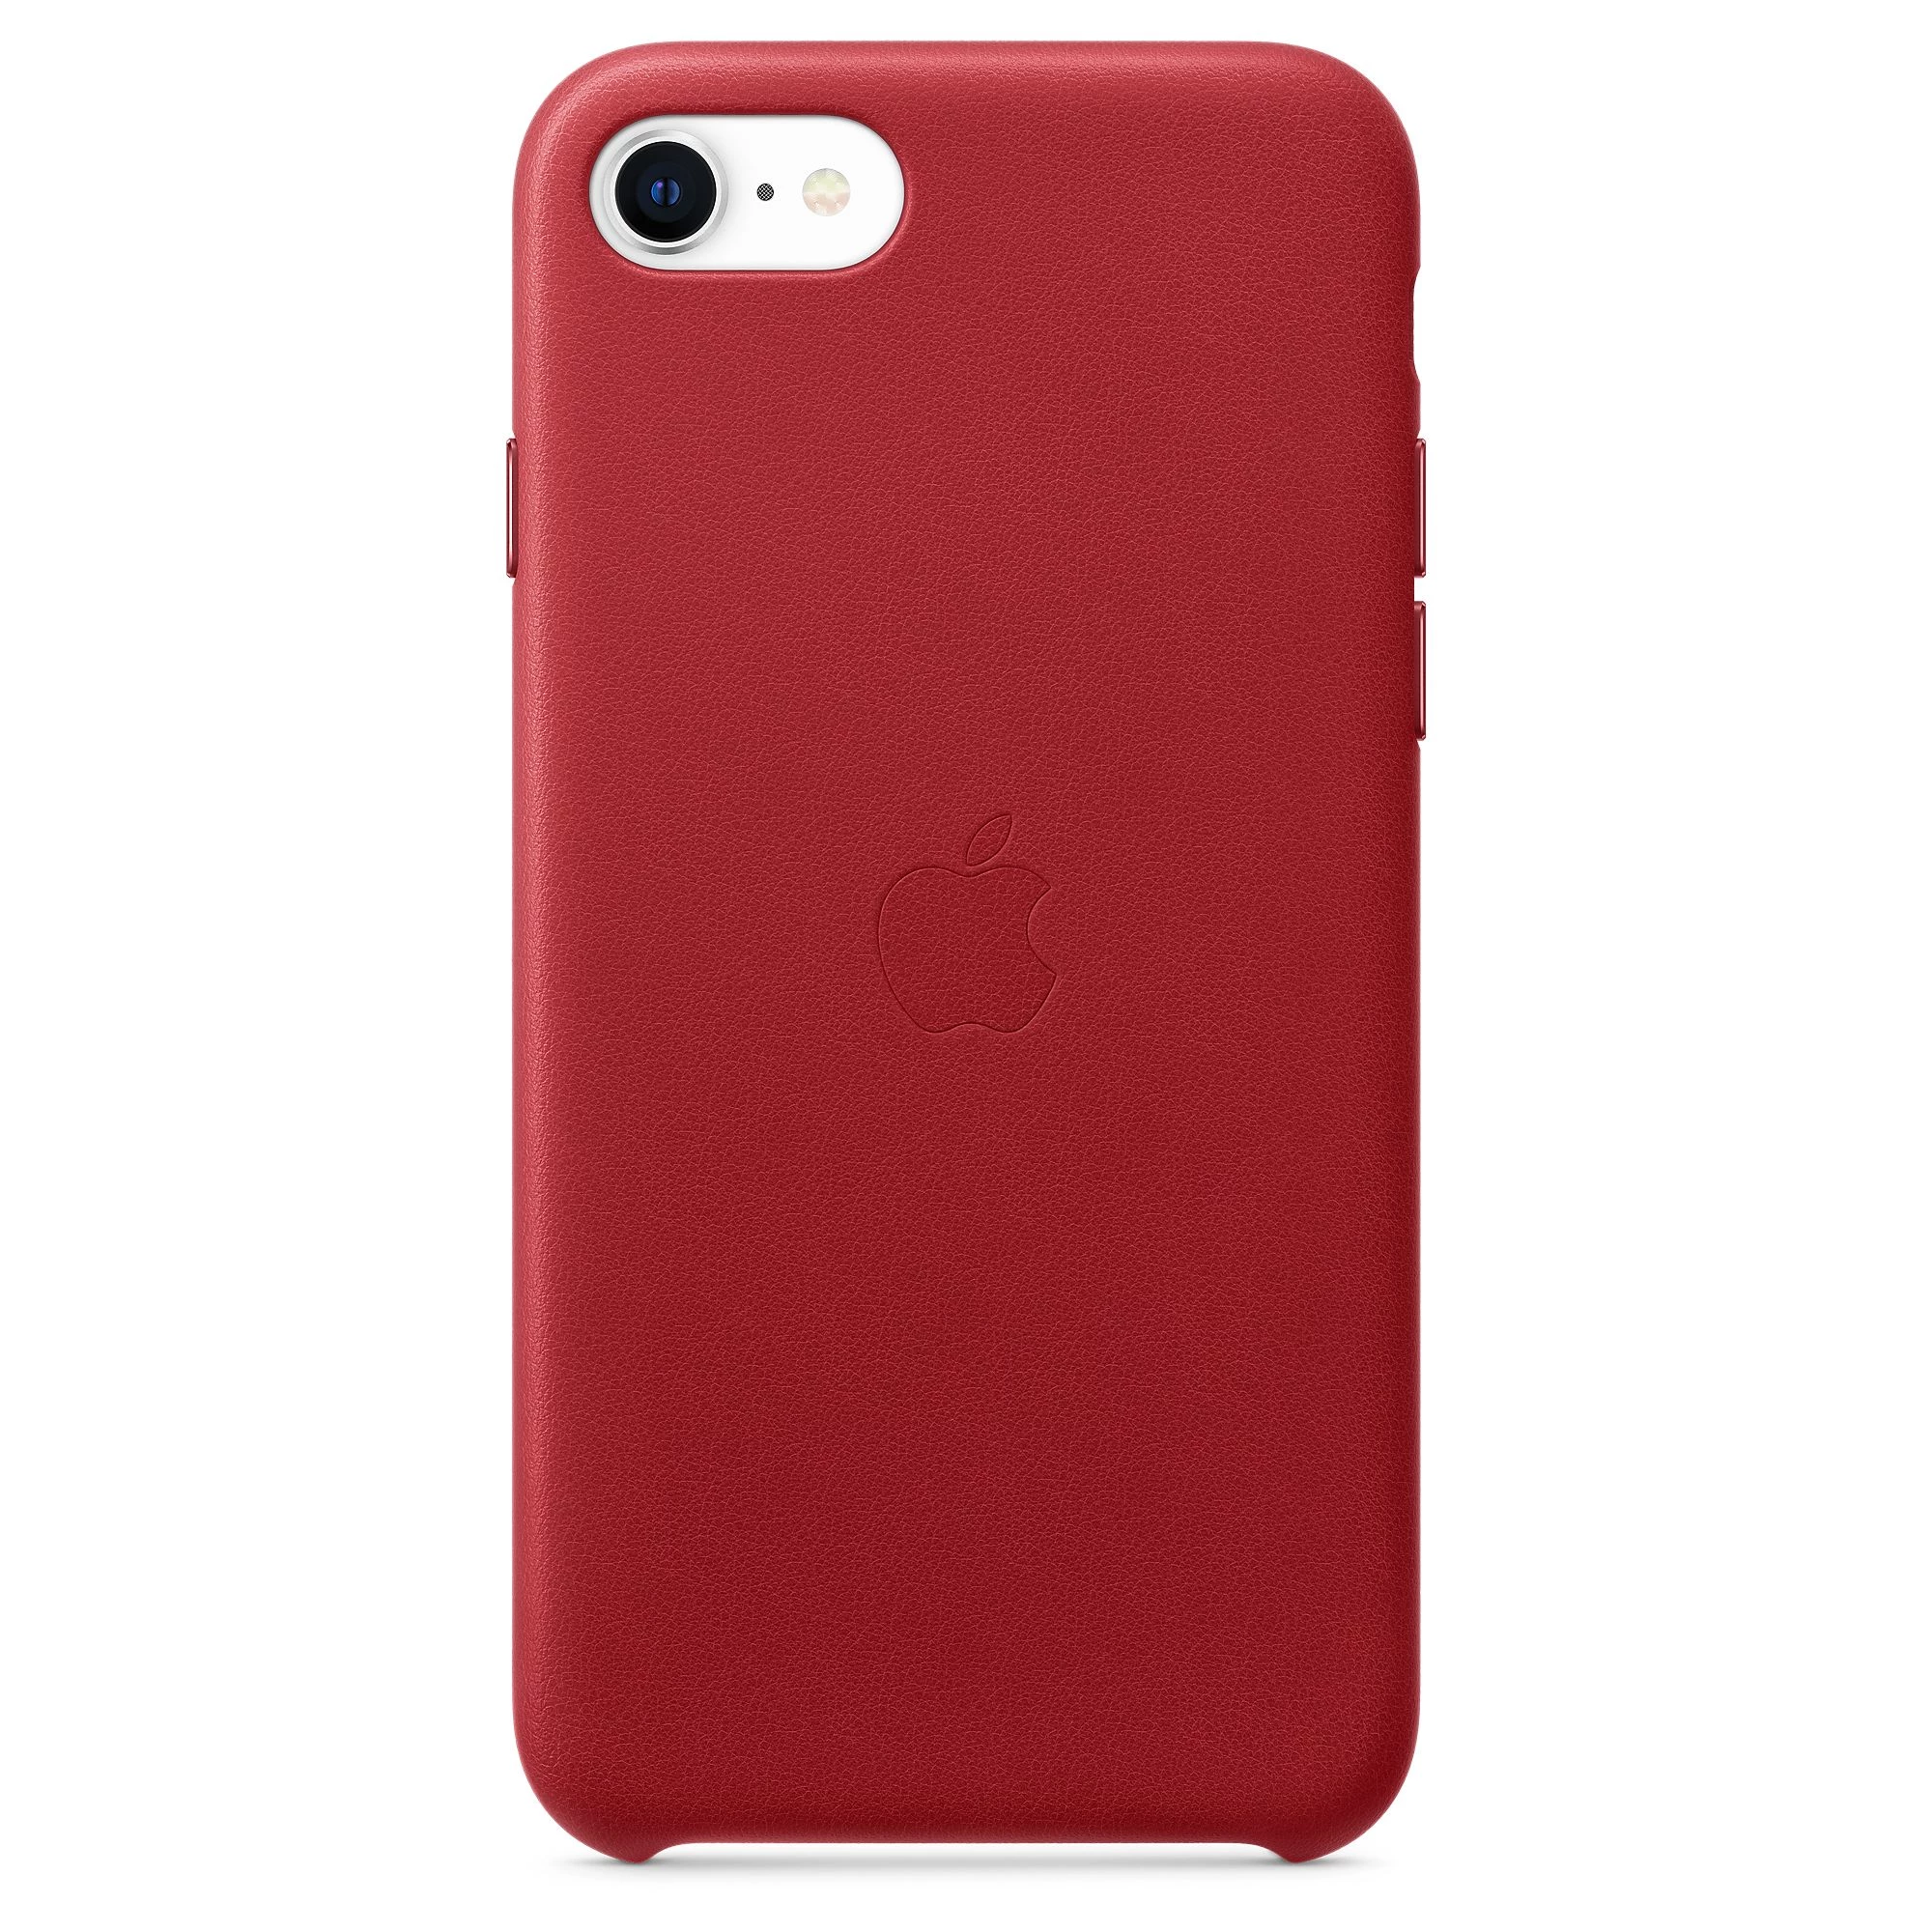 Apple iPhone SE Leather Case - (PRODUCT) RED (MXYL2)